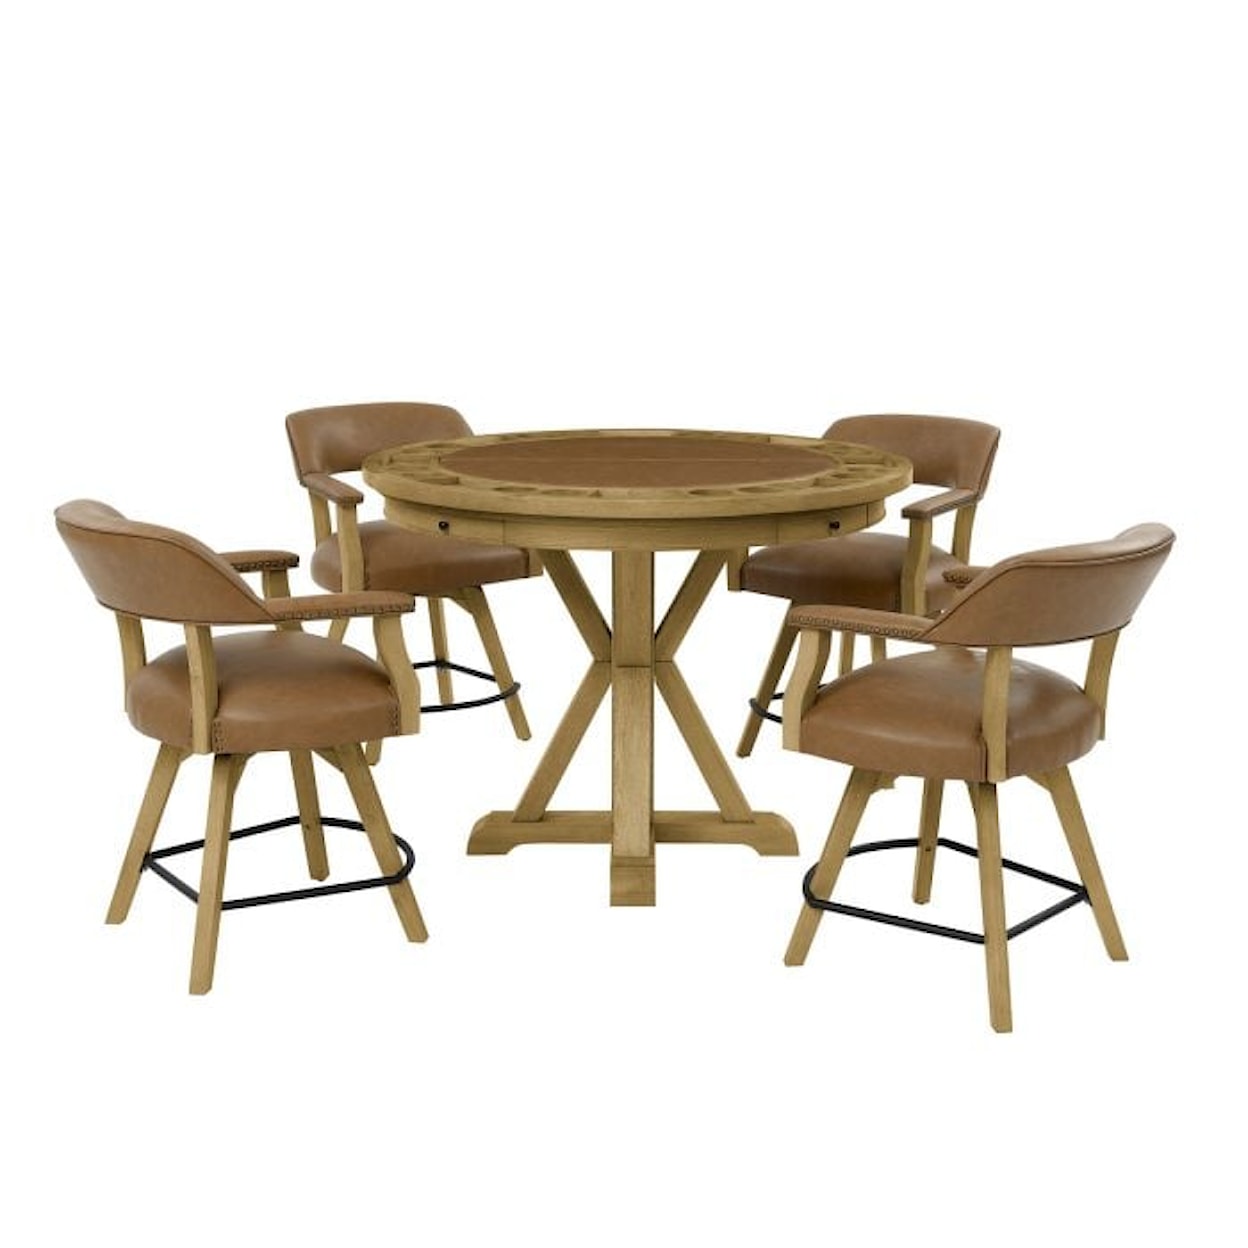 Prime Rylie 6-Piece Game Dining Set